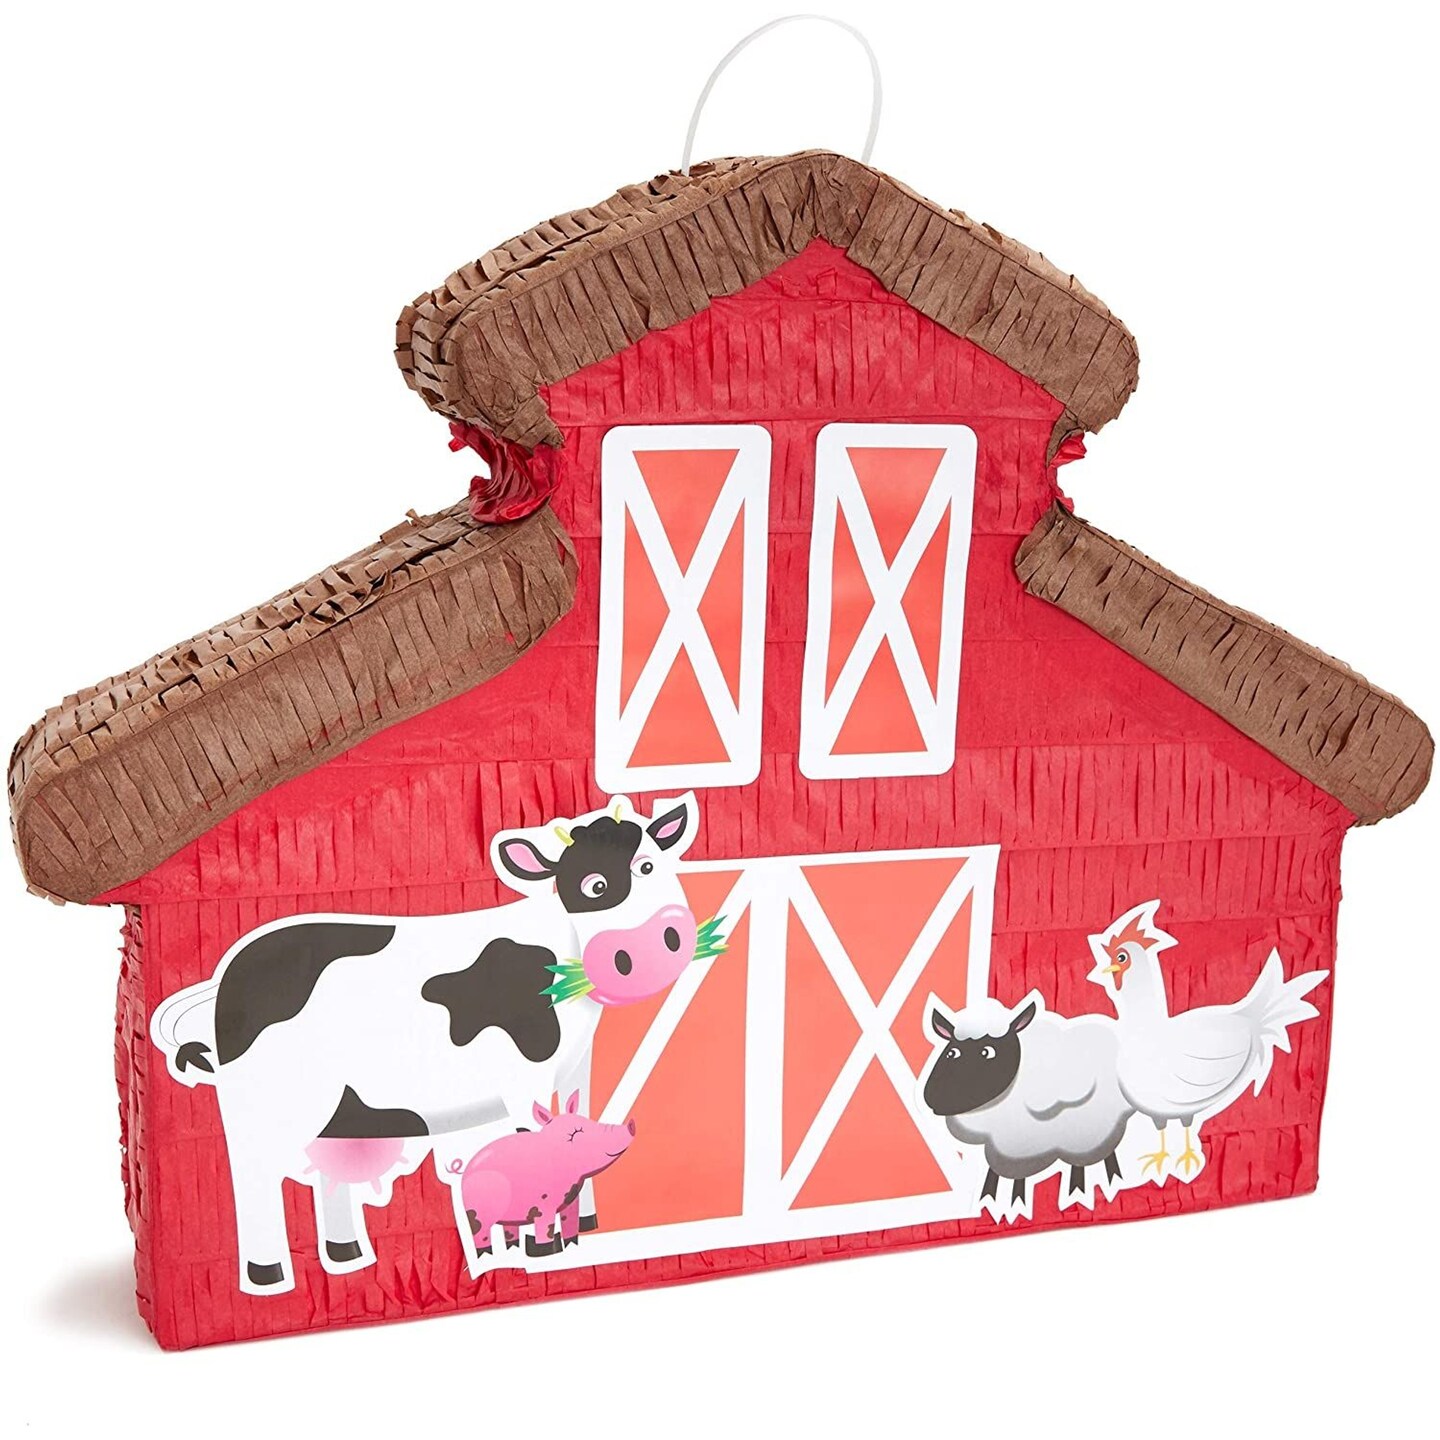 Barnyard Pinata for Farm Animals Birthday Decorations, Barn Party Supplies for Baby Shower (Small, 16.5 x 3.0 x 12.6 In)